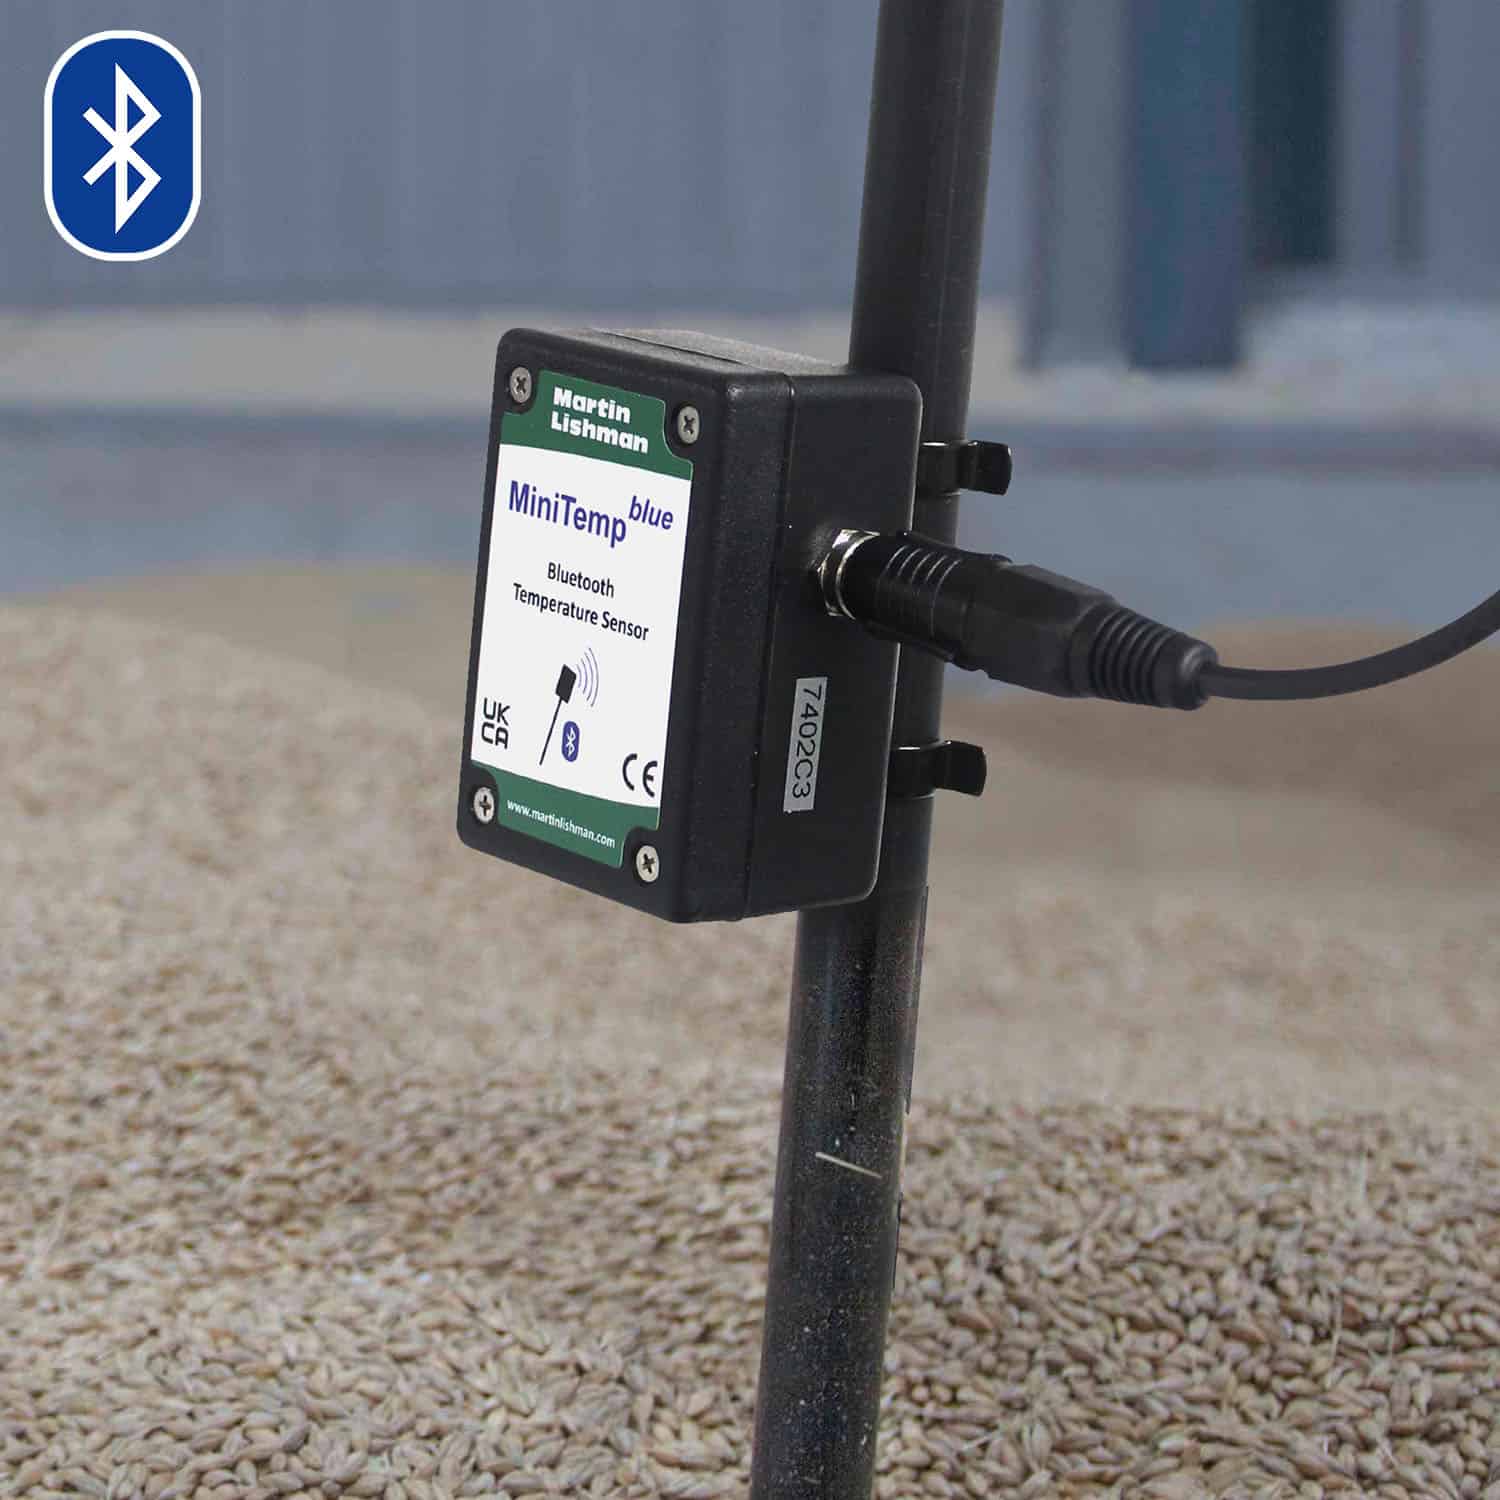 The MiniTemp Blue measures grain temperatures and sends the readings to a smartphone via Bluetooth